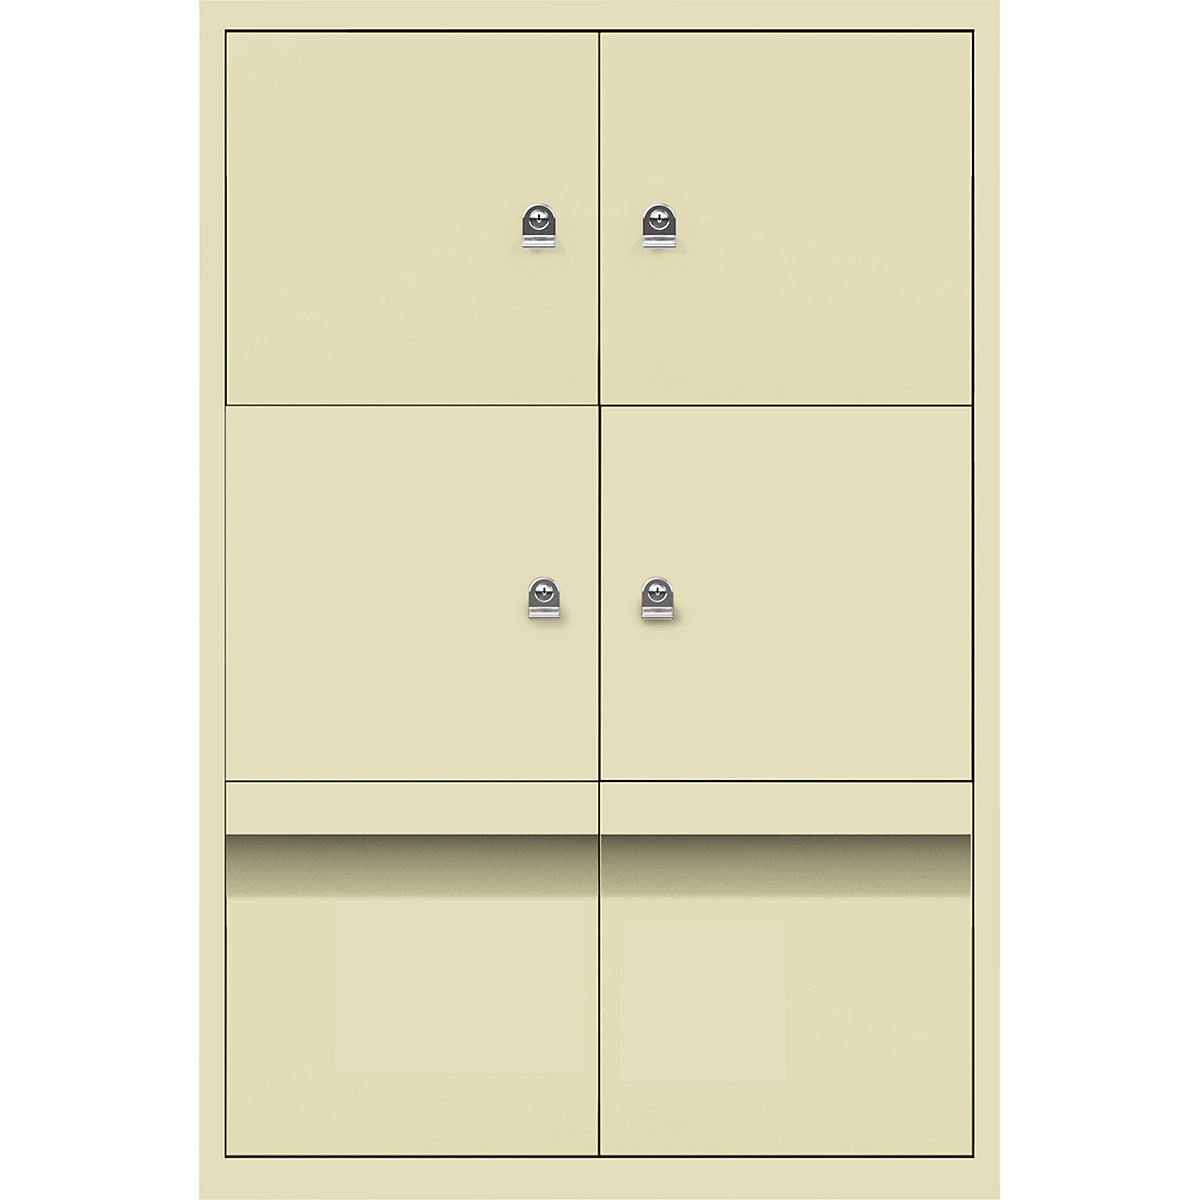 LateralFile™ lodge – BISLEY, with 4 lockable compartments and 2 drawers, height 375 mm each, cream-28